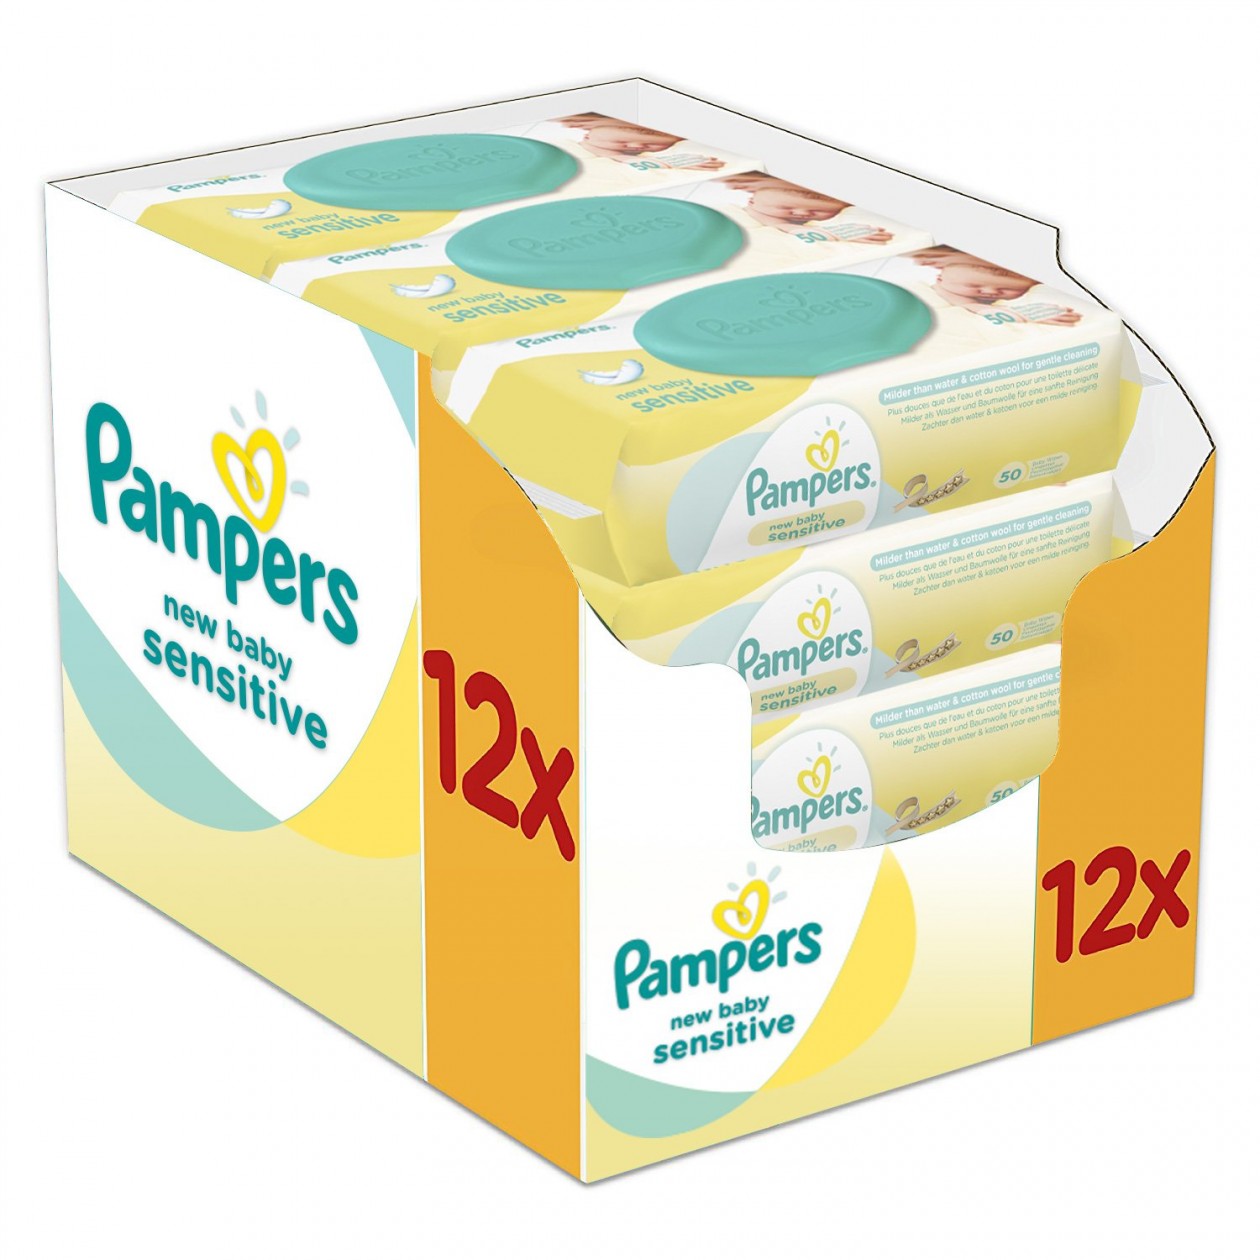 Pampers Sensitive Protect Baby Wipes, 12 Packs (672 Wipes)